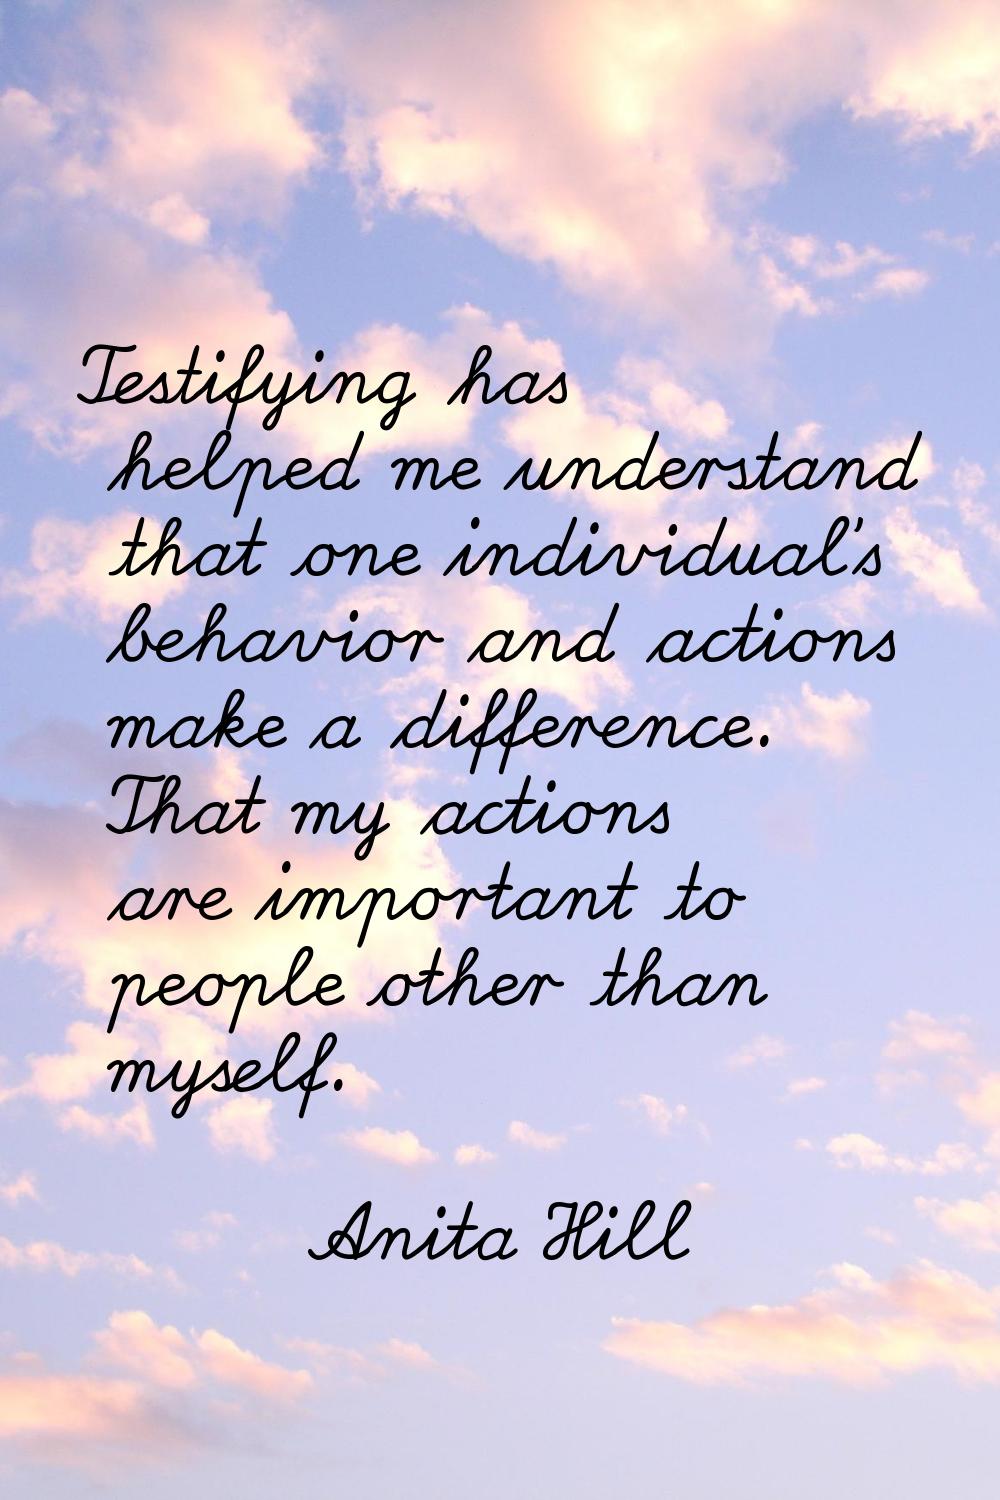 Testifying has helped me understand that one individual's behavior and actions make a difference. T